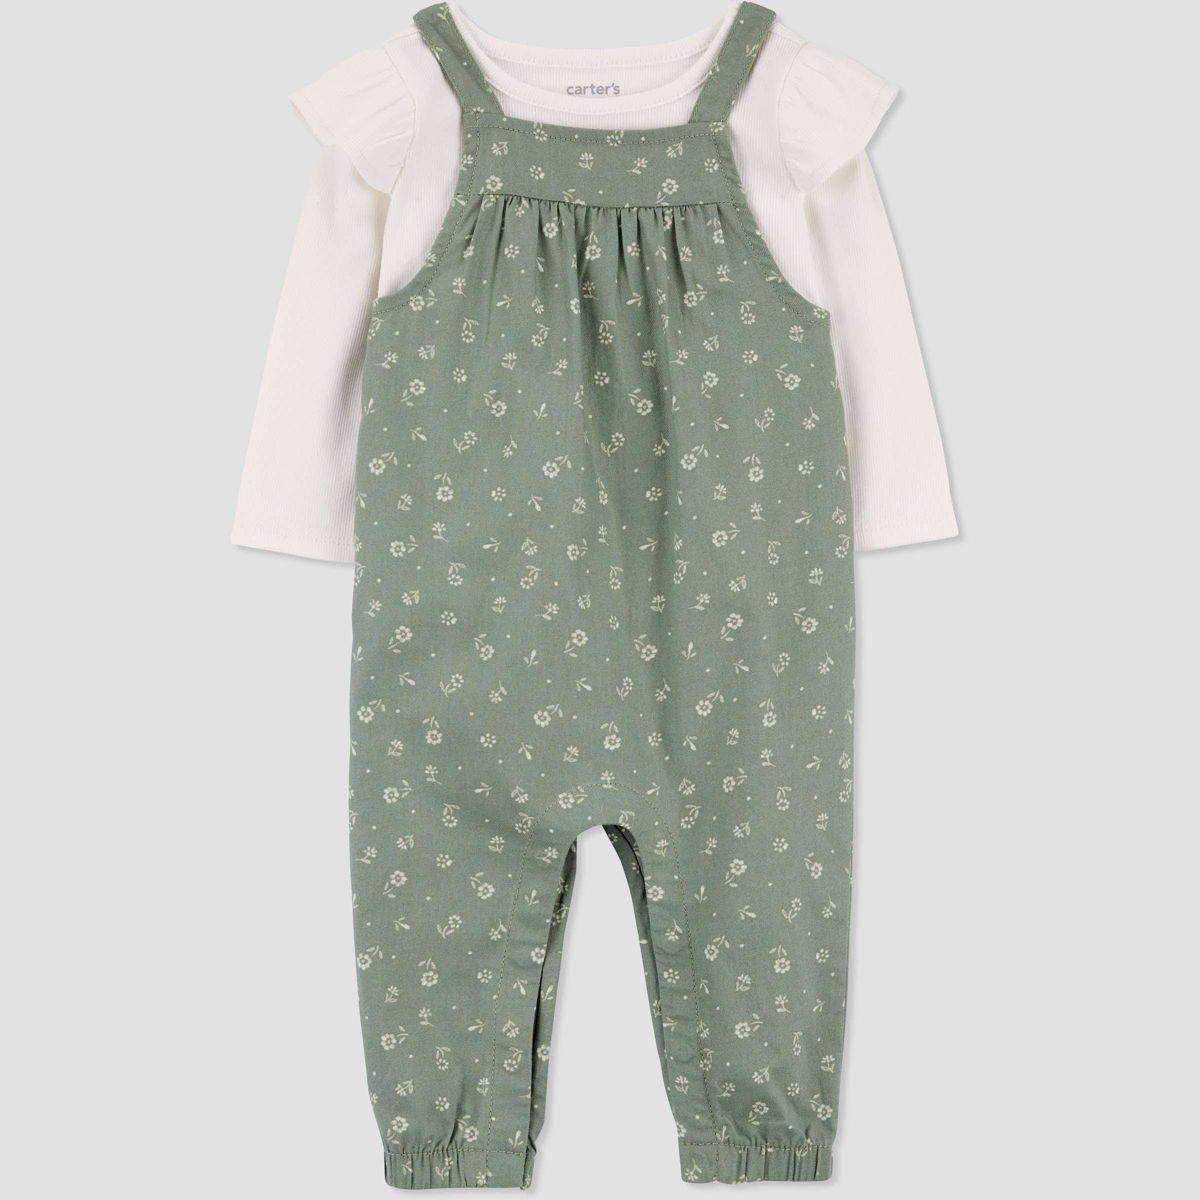 Carter's Just One You® Baby Girls' Floral Top & Overalls Set - Green/Ivory | Target